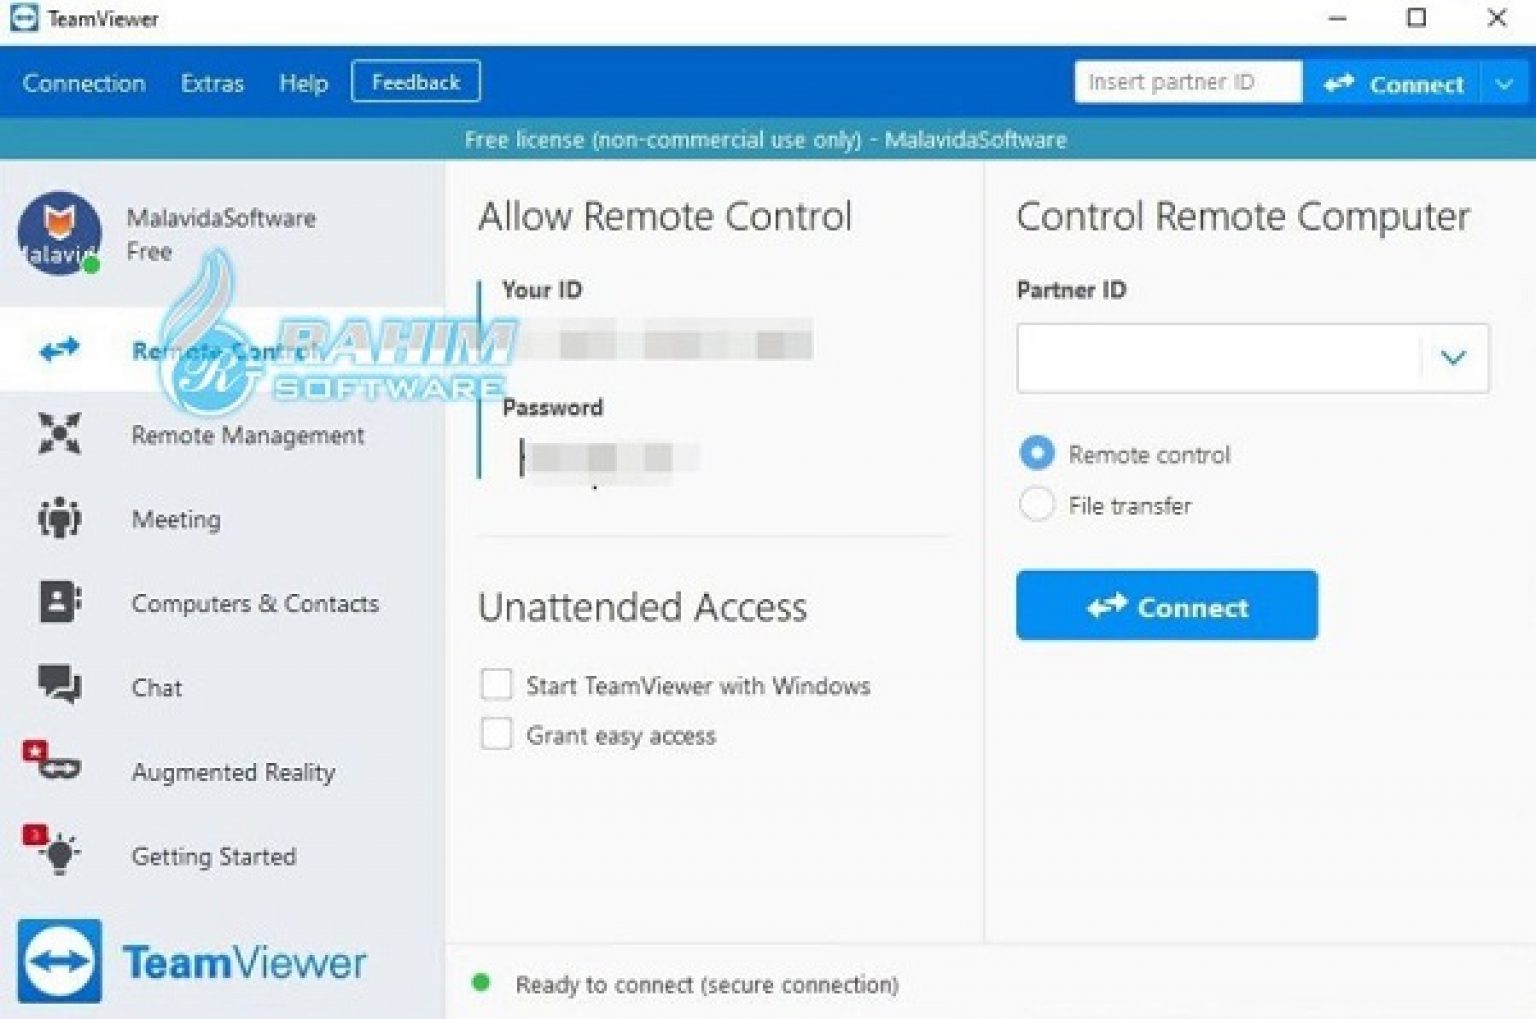 is teamviewer free limited to 15 computer